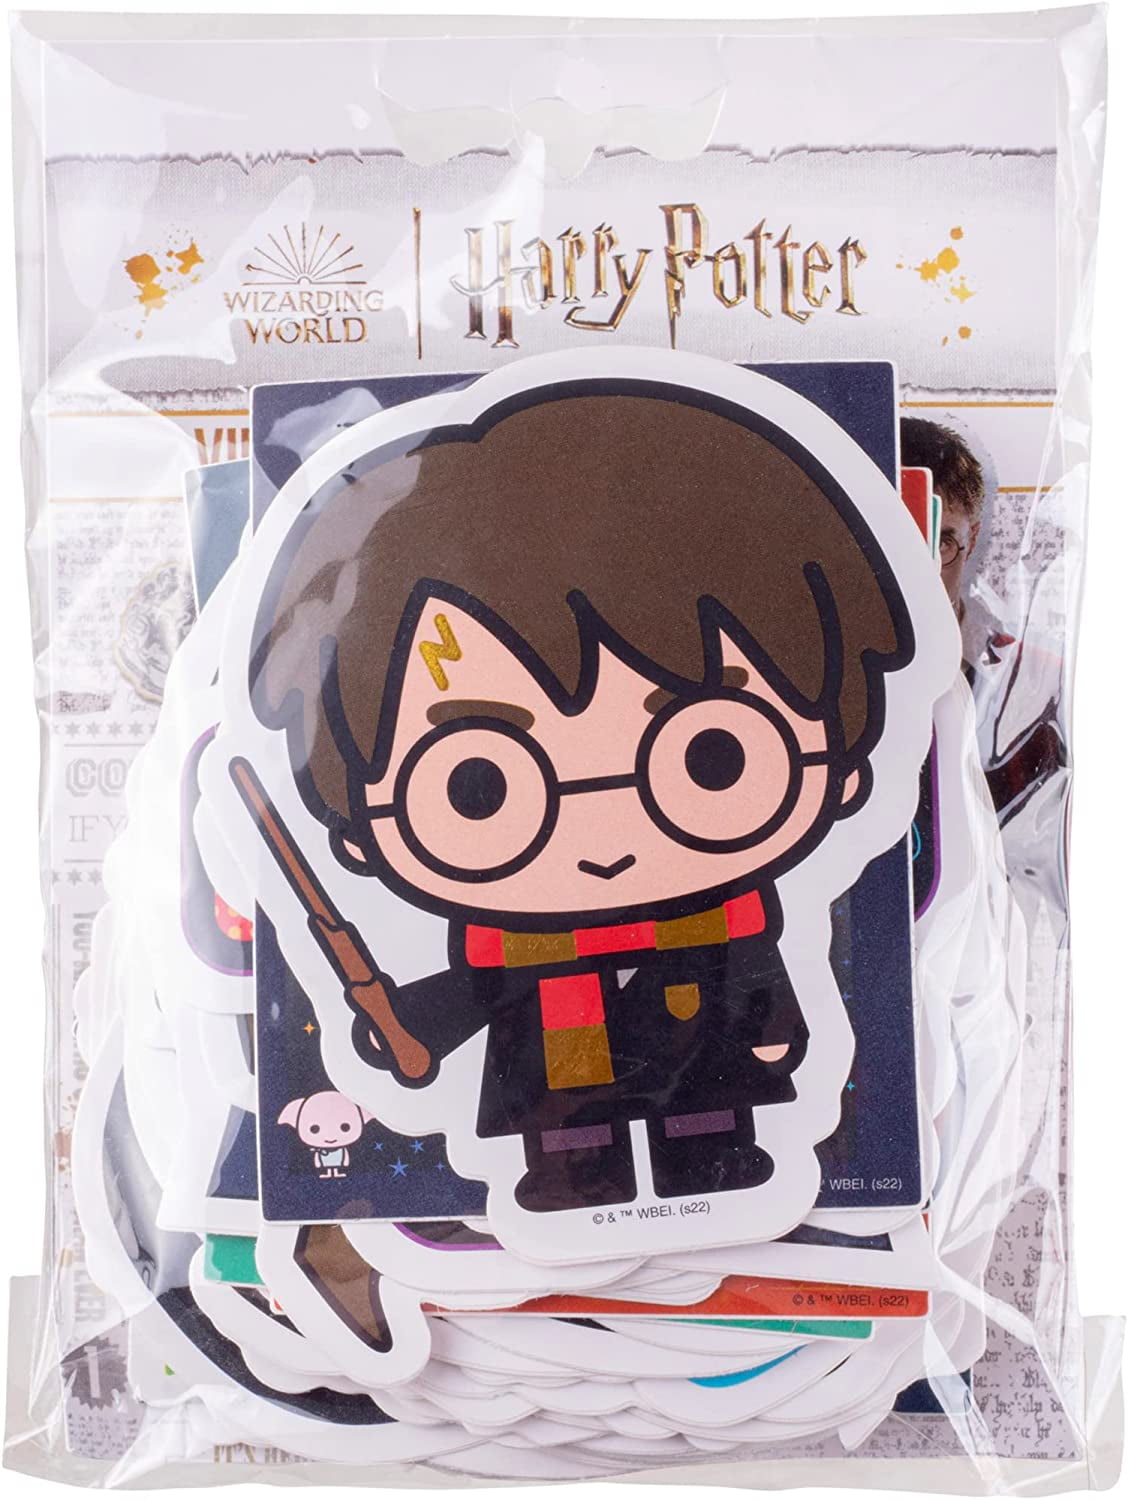 50pcs Harry Potter Classical Scenes Variety Vinyl Stickers Printed On  Quality, Matte Finish For Laptop, Water Bottle, Scrapbook Christmas,  Halloween, Thanksgiving Day Gift 